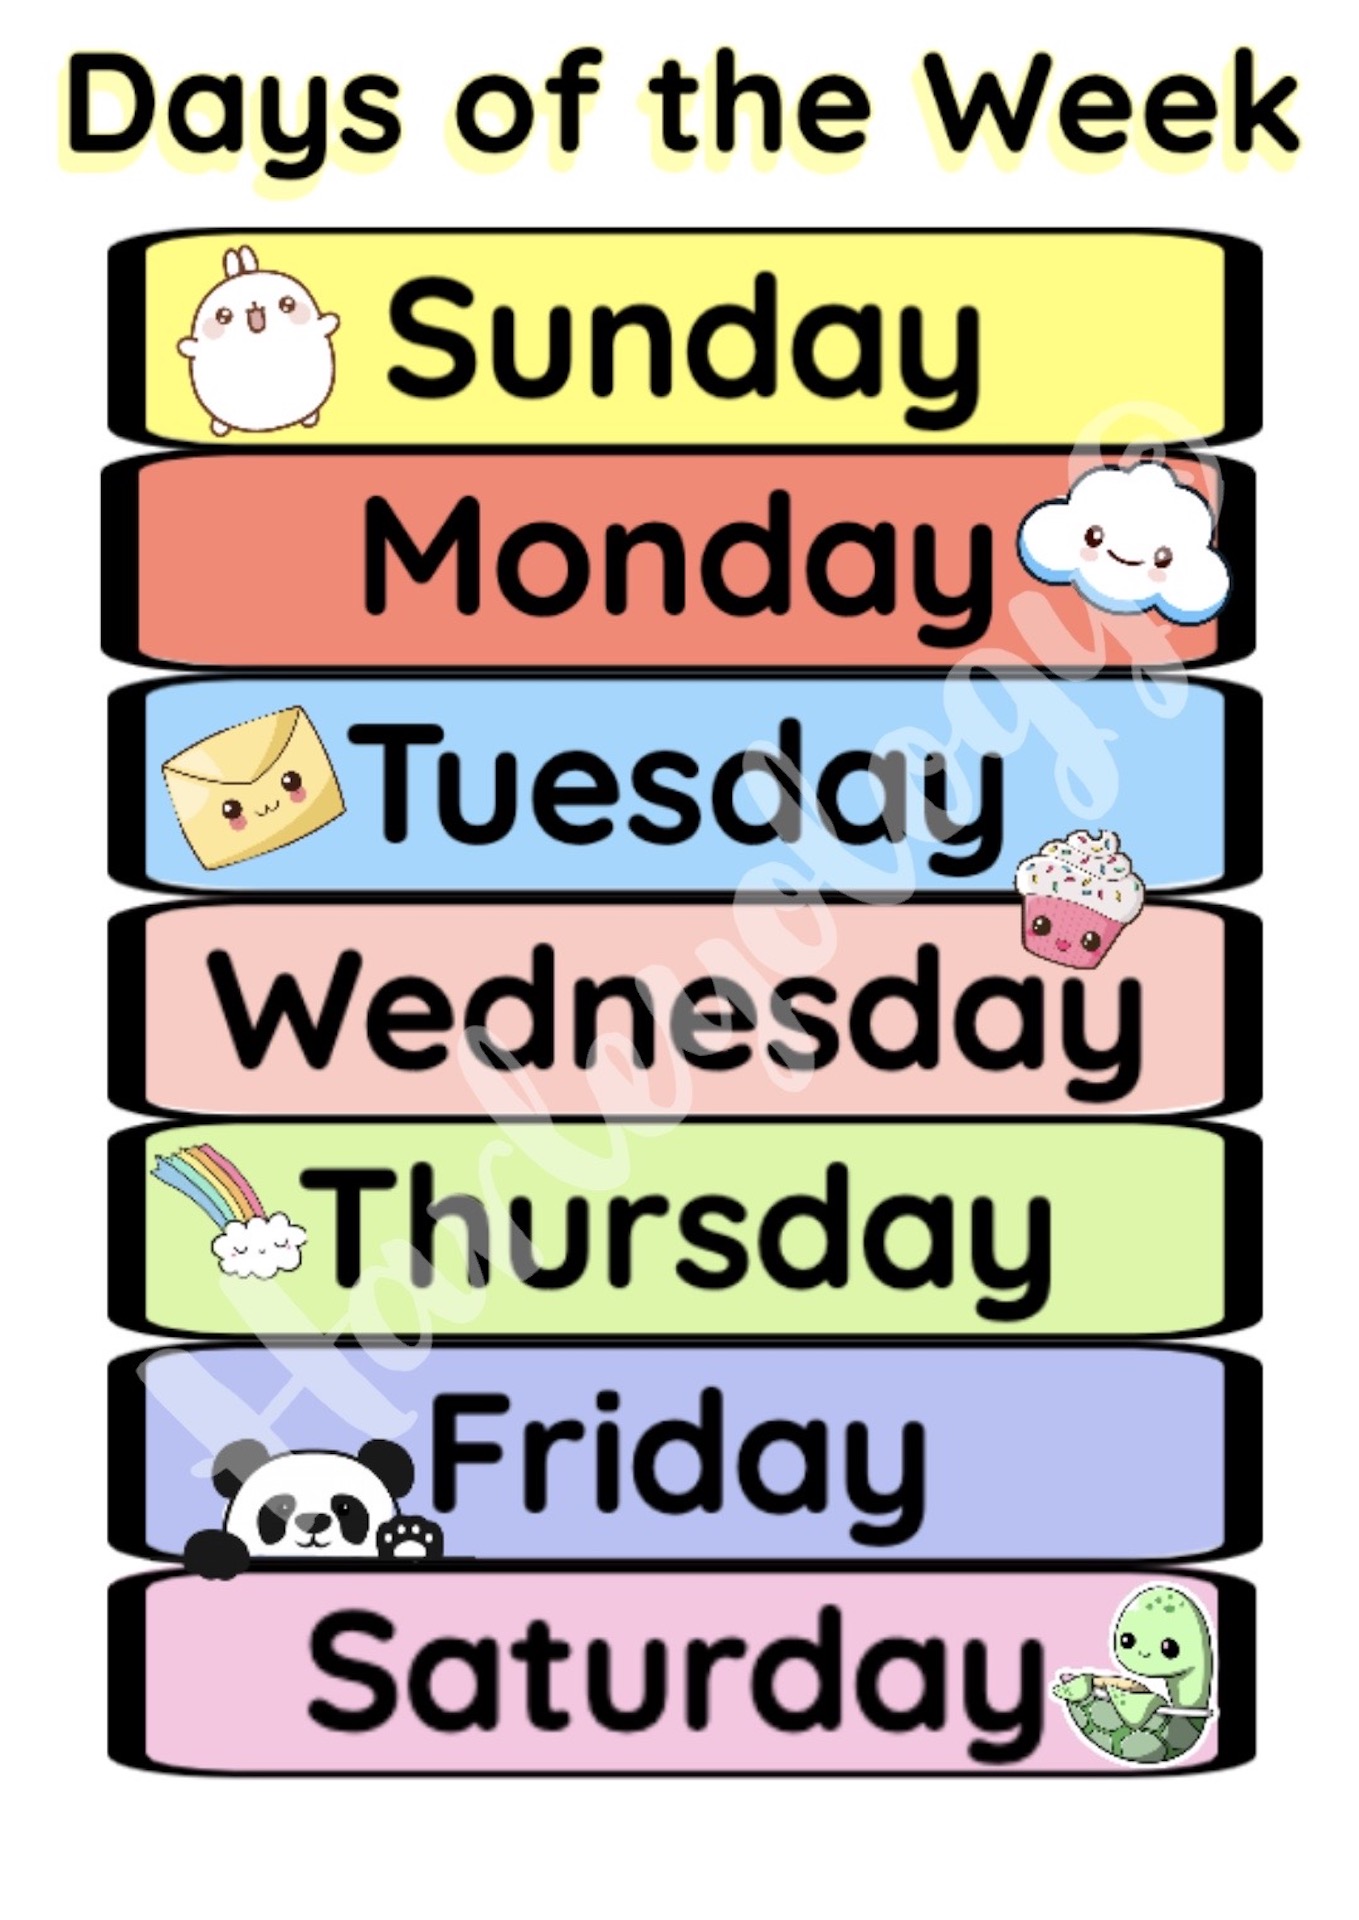 Days Of The Week Laminated Wall Chart Flash Cards Educational Chart A4 Size Bond Paper For Kids Toddlers Lazada Ph